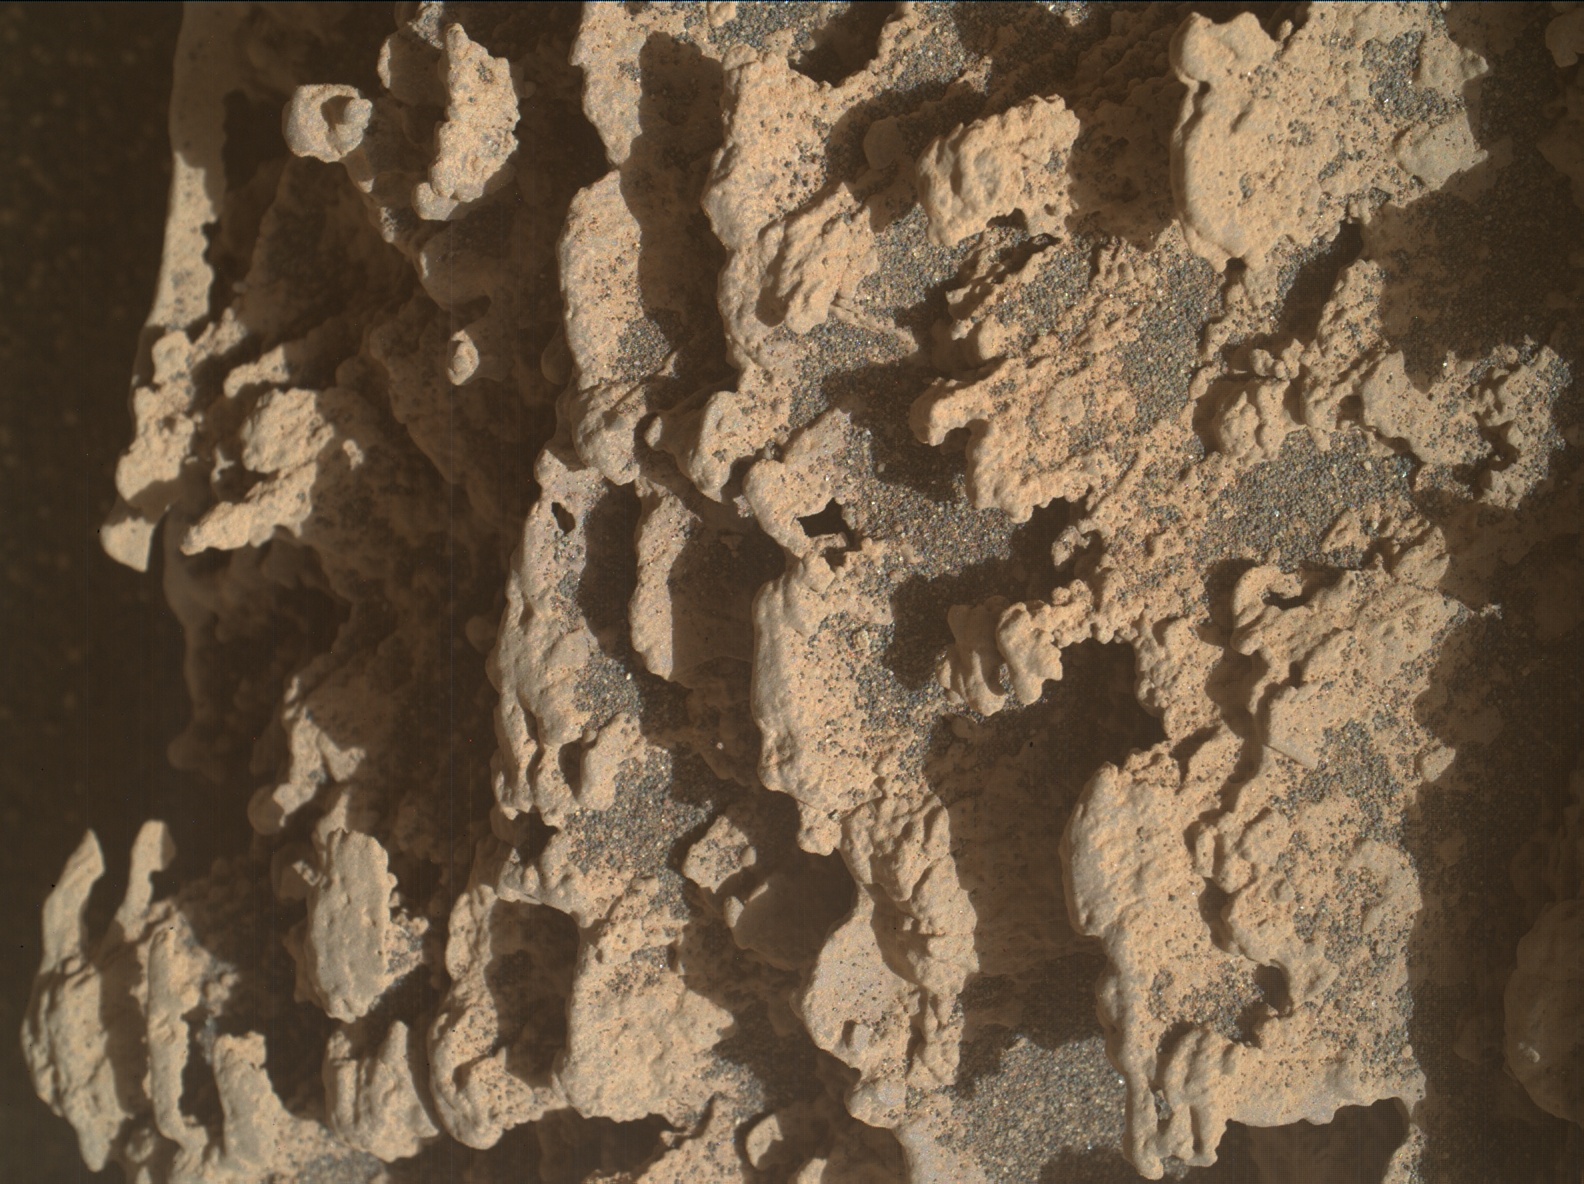 Nasa's Mars rover Curiosity acquired this image using its Mars Hand Lens Imager (MAHLI) on Sol 3599